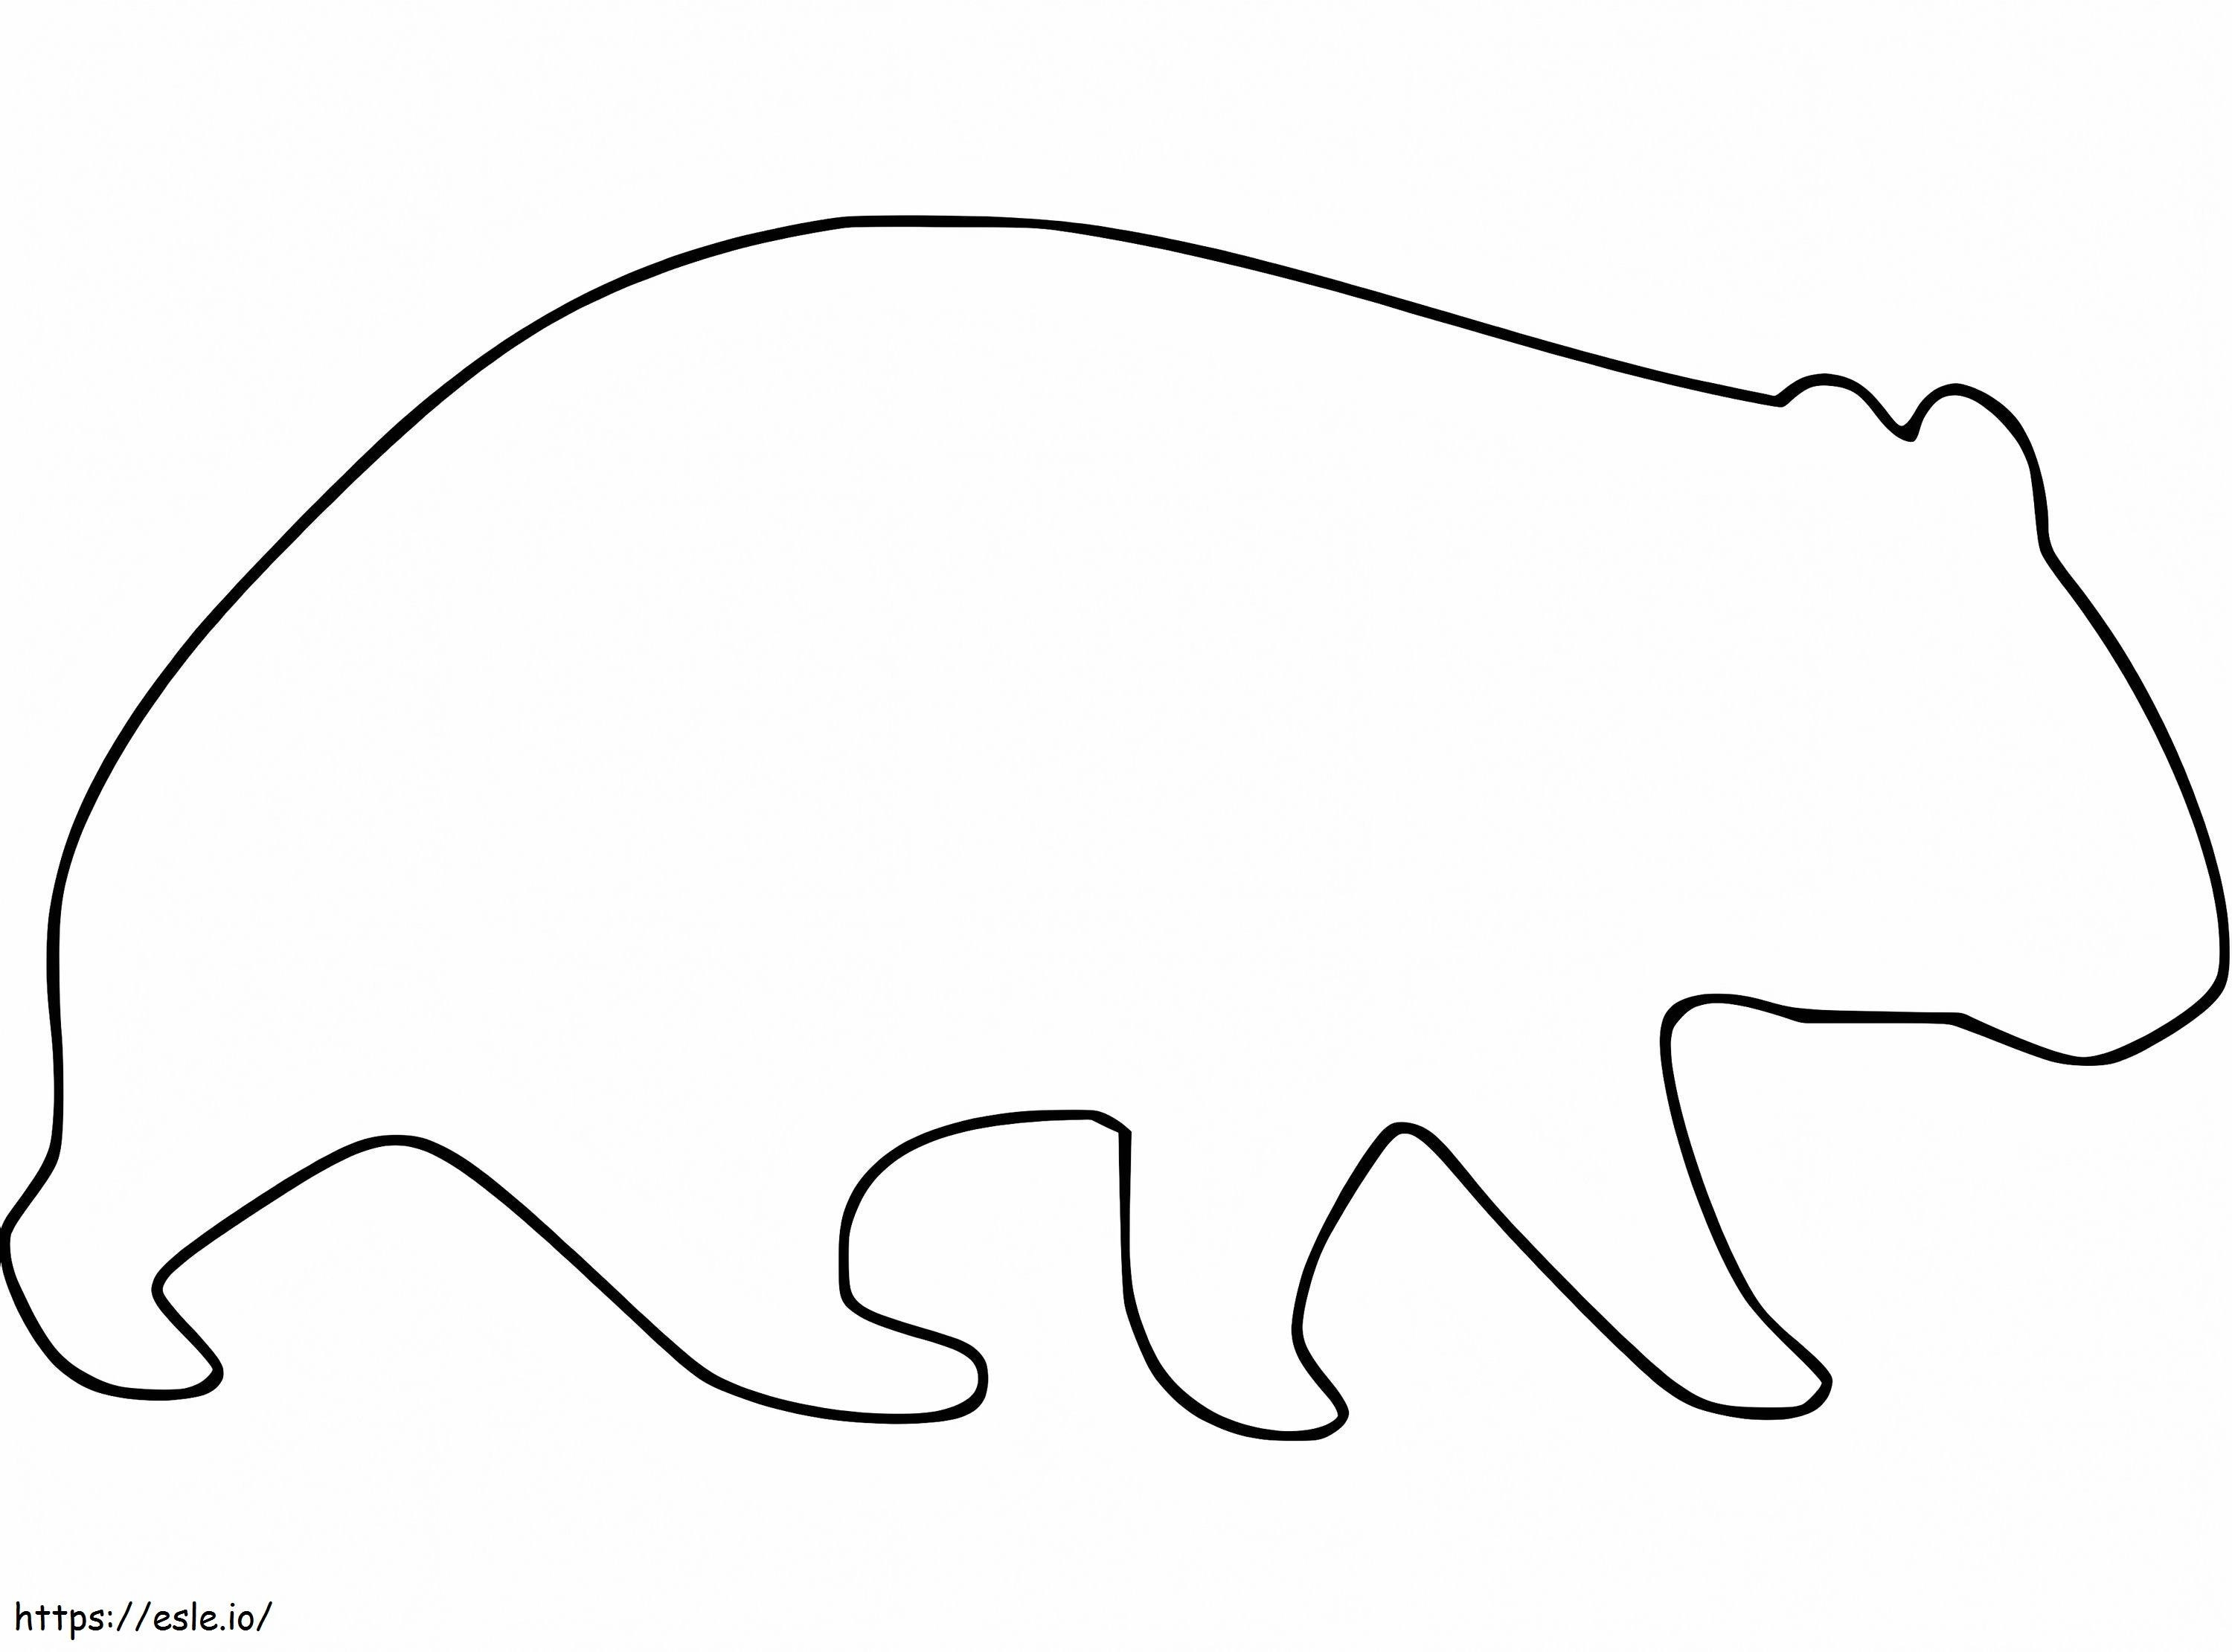 Wombat Outline coloring page